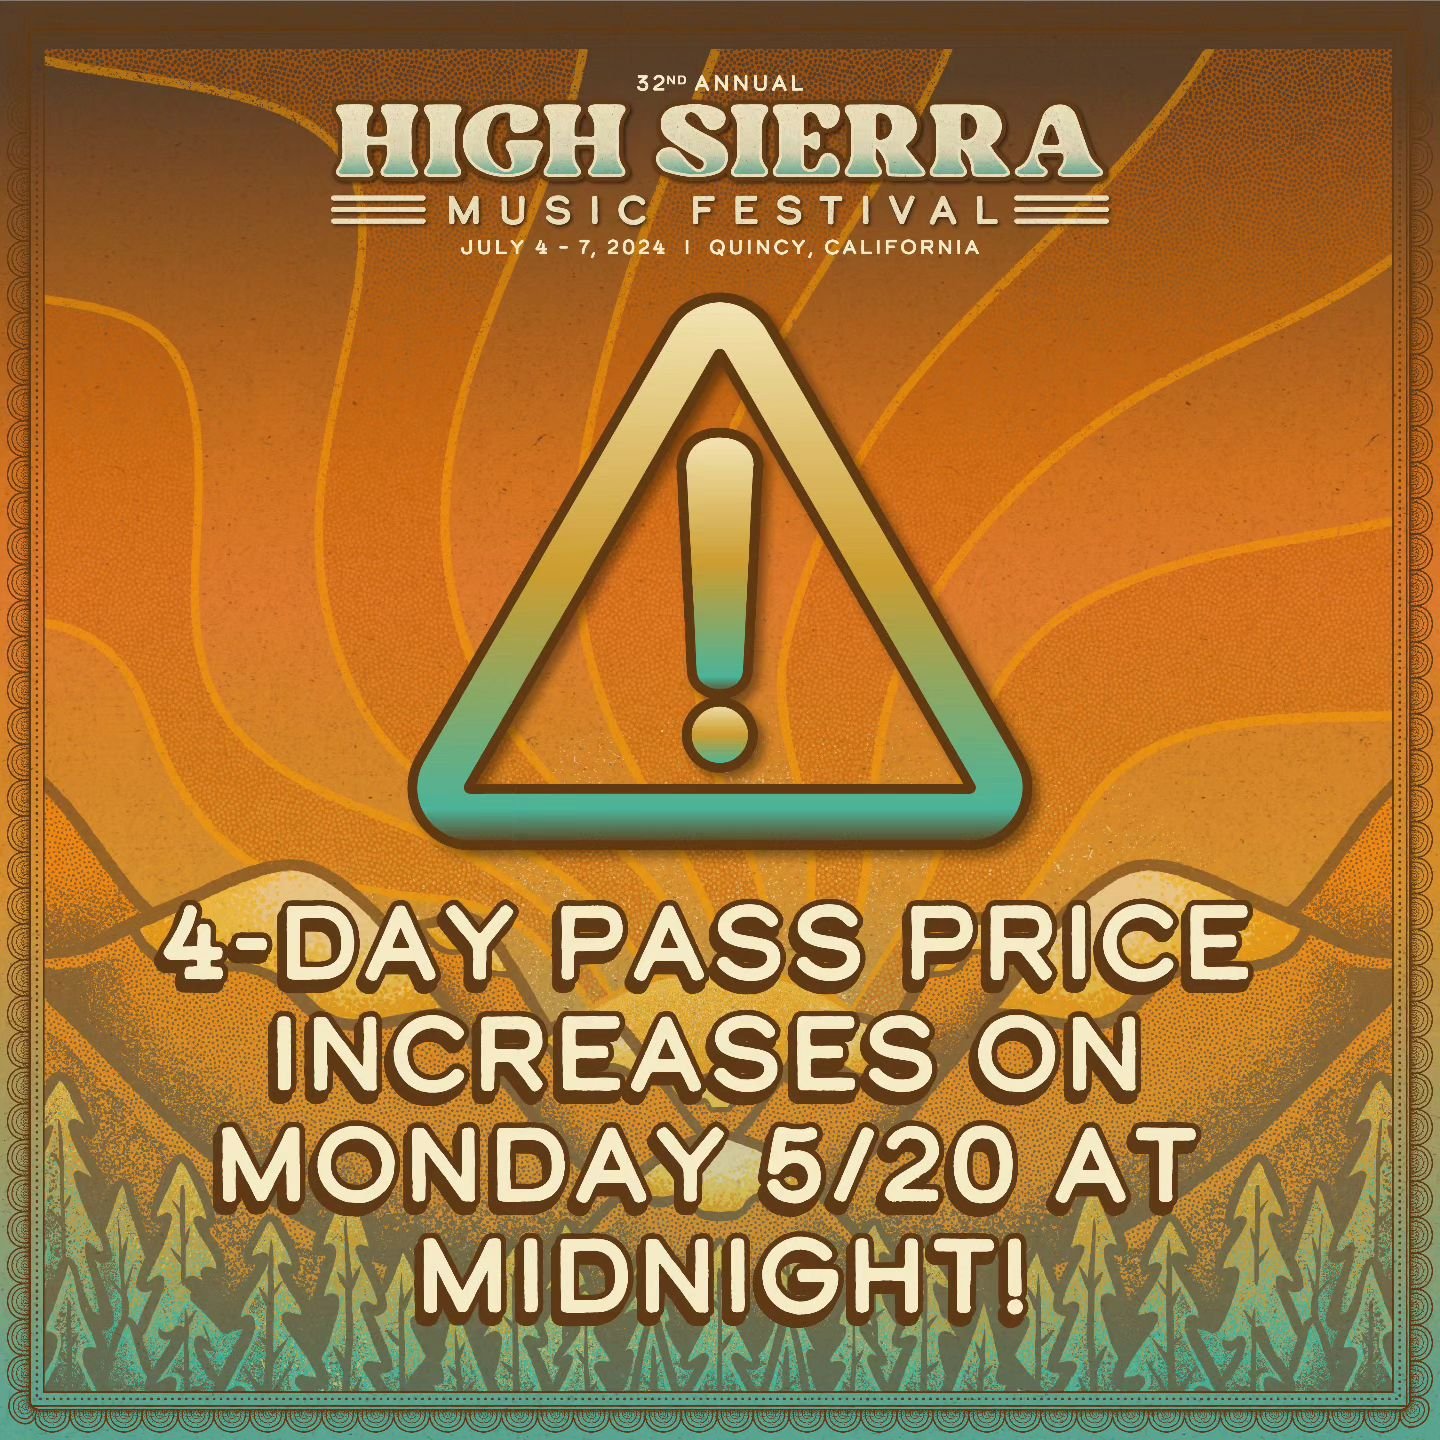 Price increase TONIGHT! Get your tickets NOW before this price tier expires for 4-day passes! Don't miss out on Larkin Poe, the Floozies, Greensky Bluegrass, and all the magic that comes along with #HighSierraMusicFestival!

Ticketing link in bio!